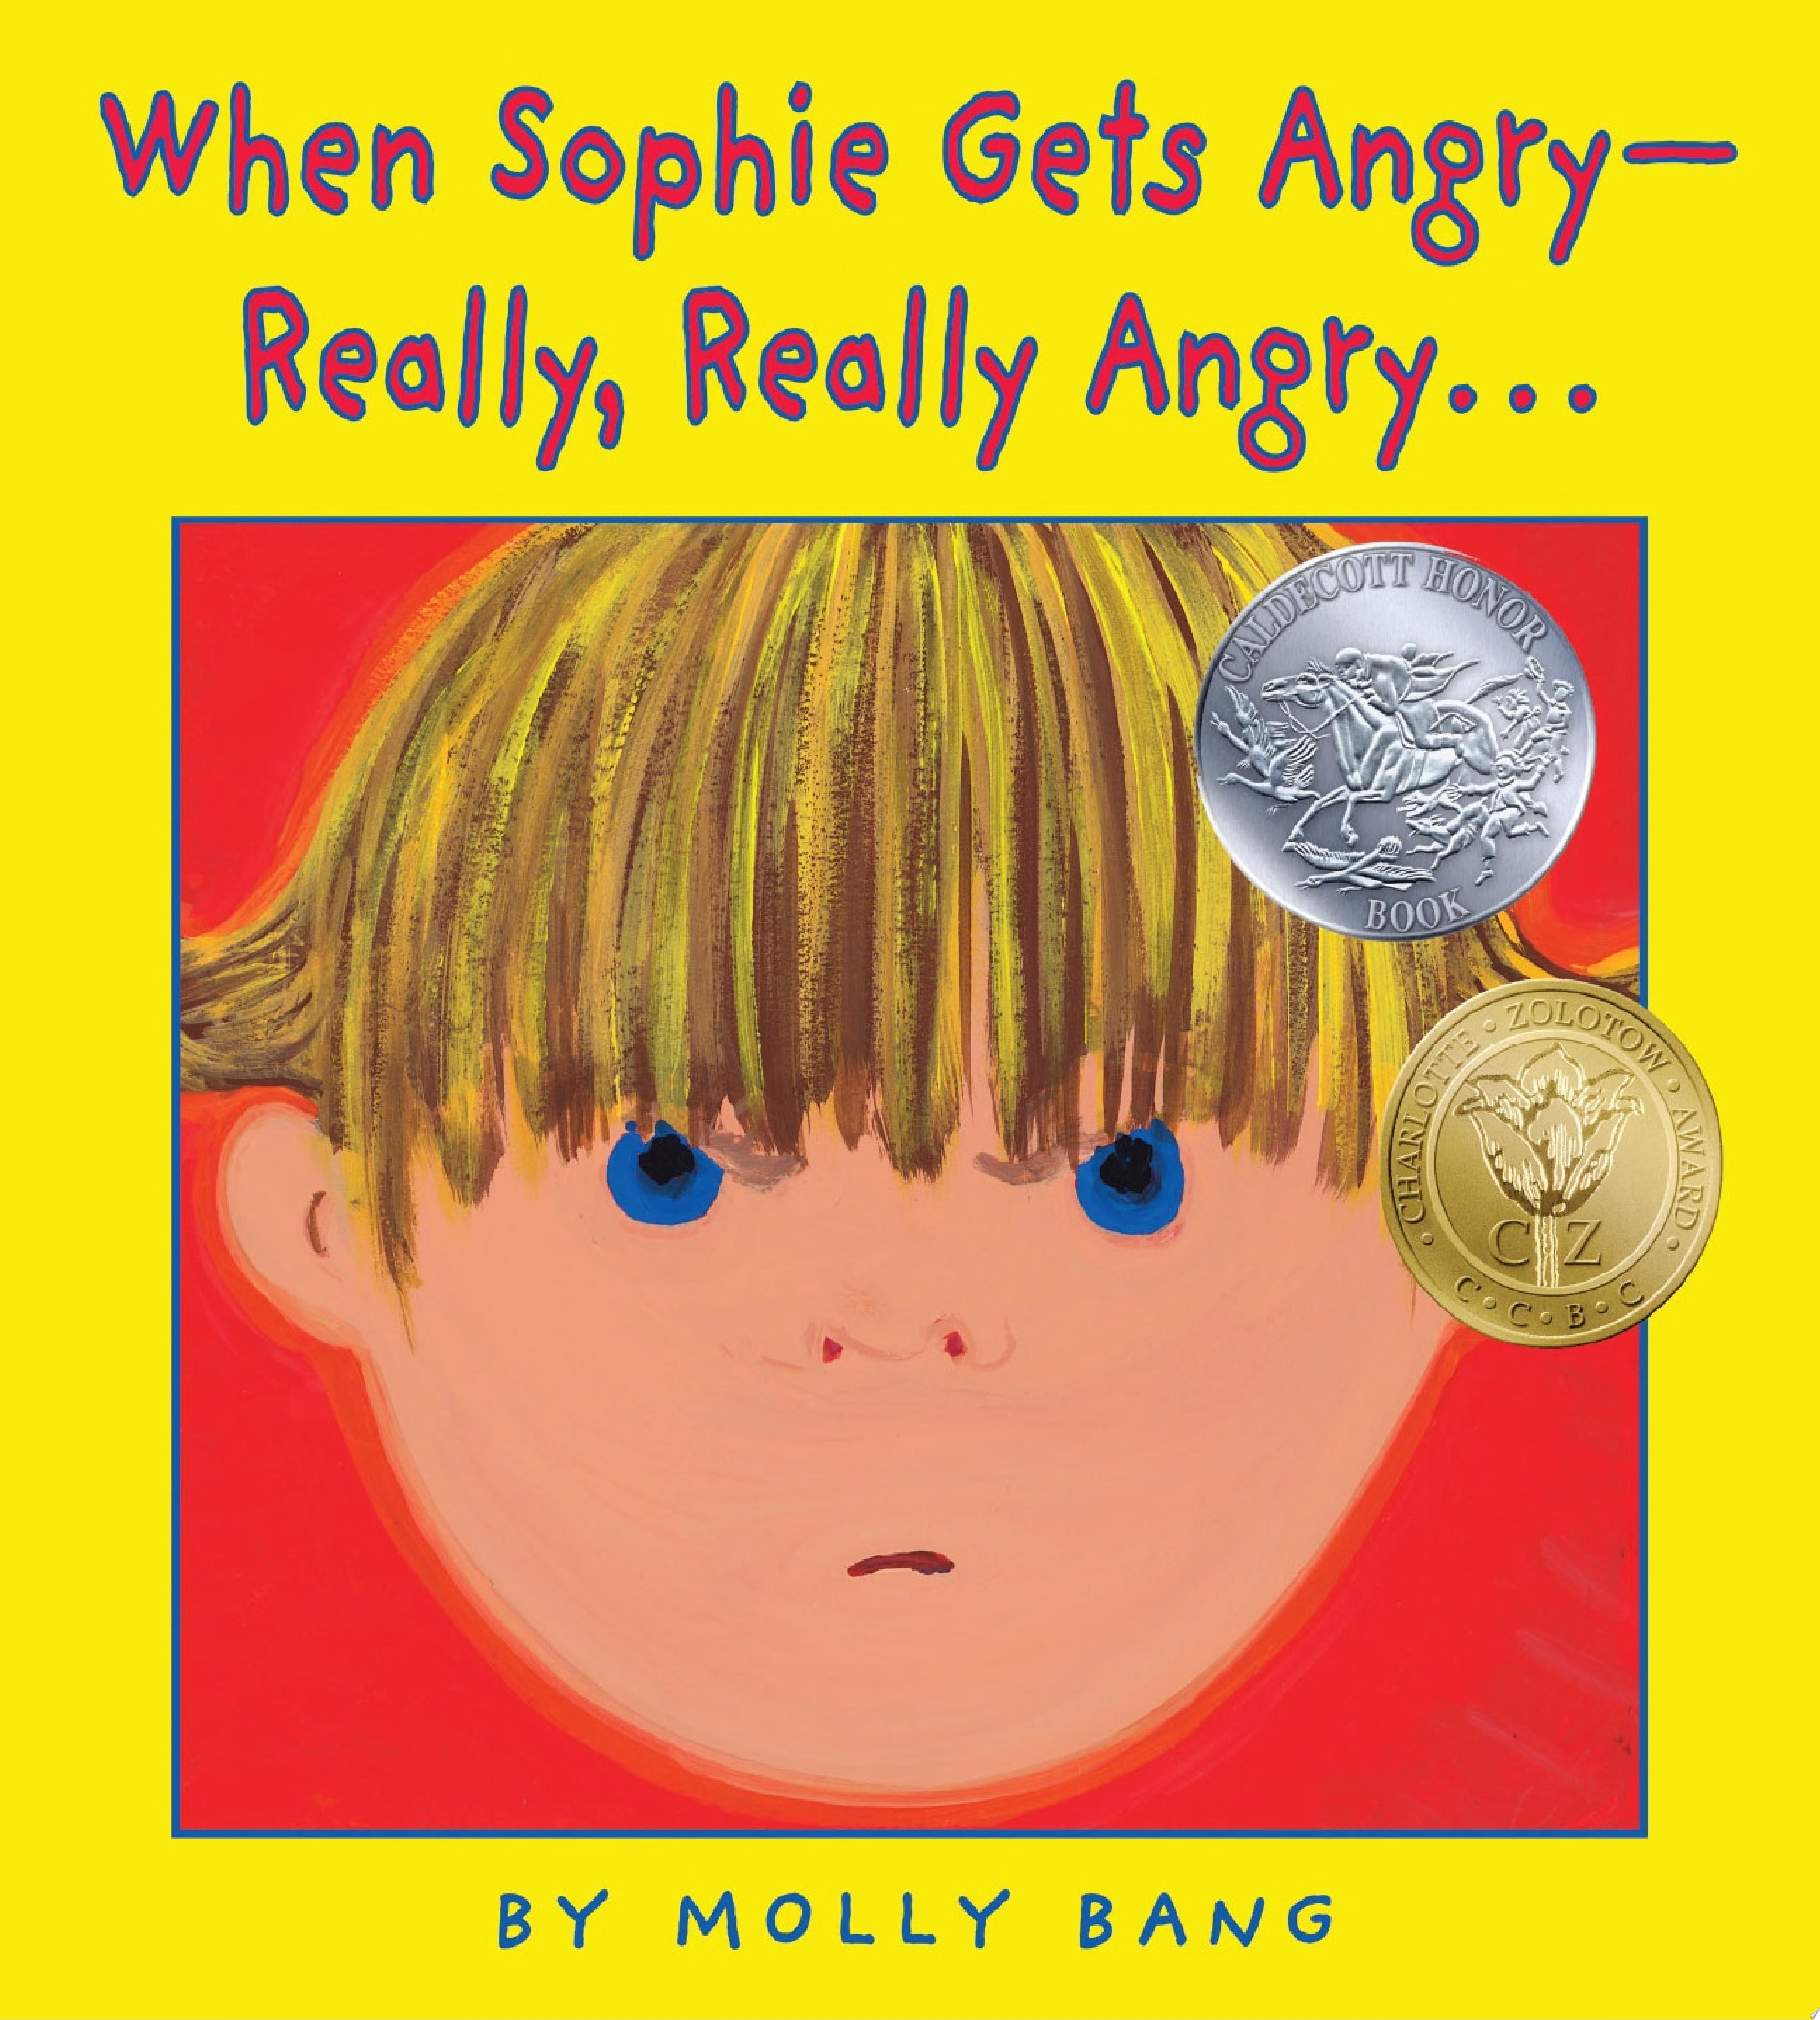 Image for "When Sophie Gets Angry--Really, Really Angry..."